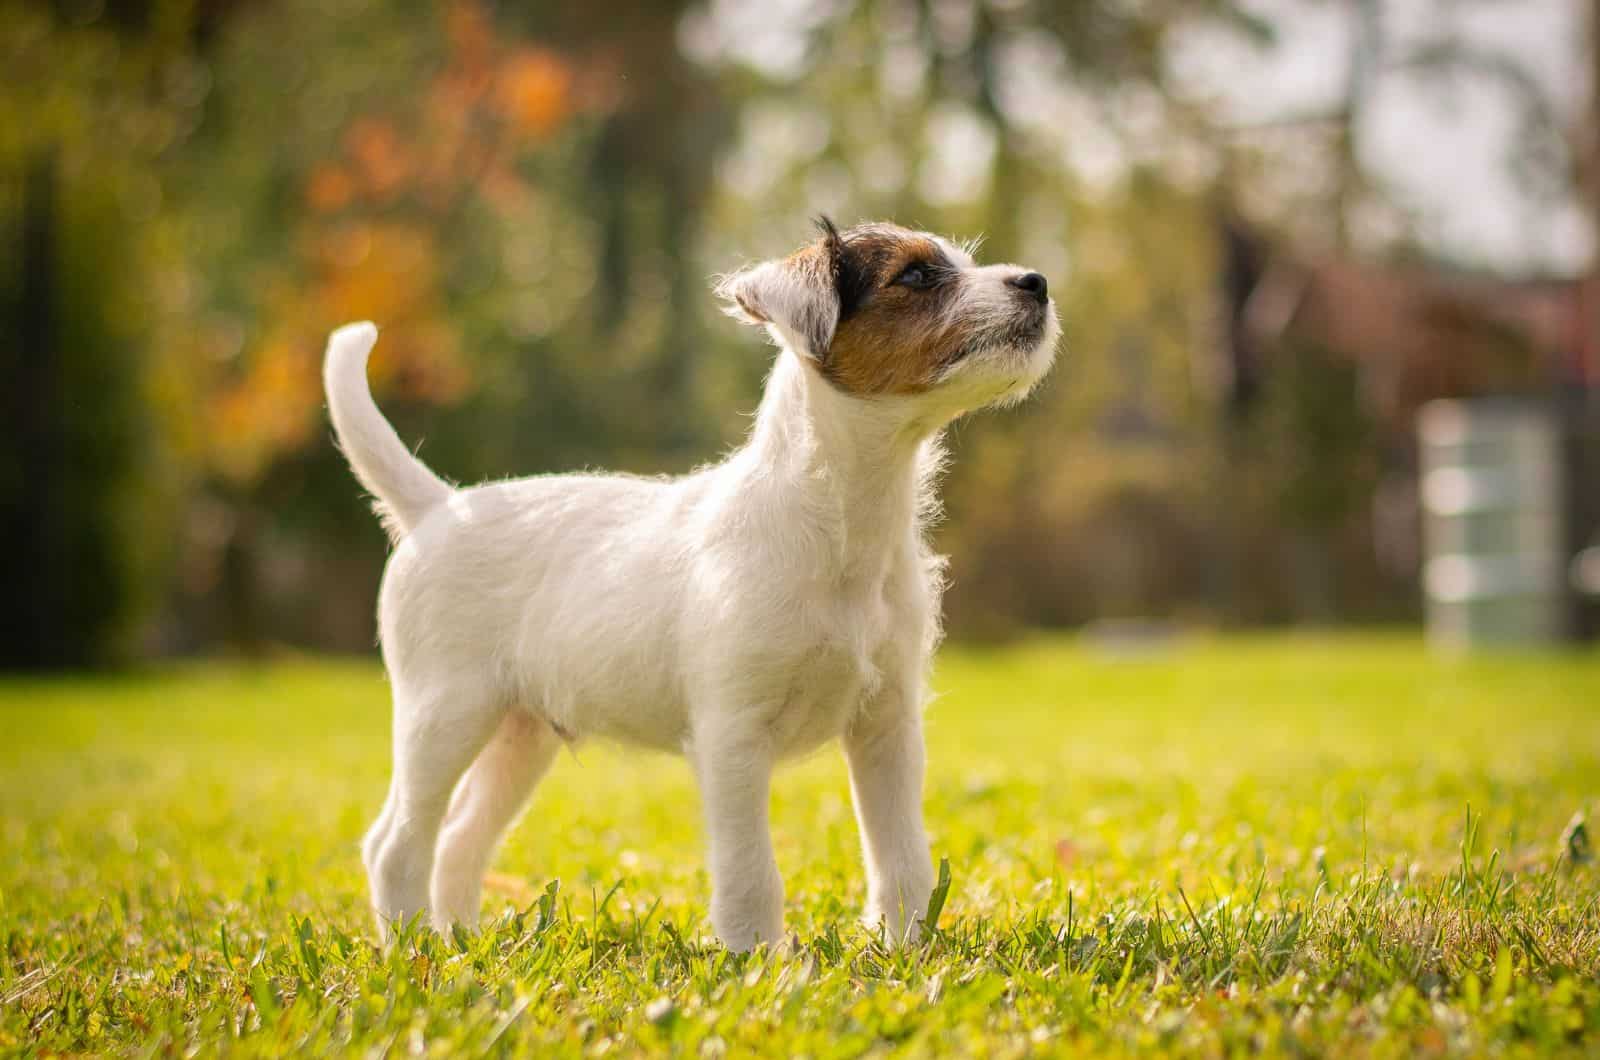 Parson Russell Terrier posing for camera while standing outside